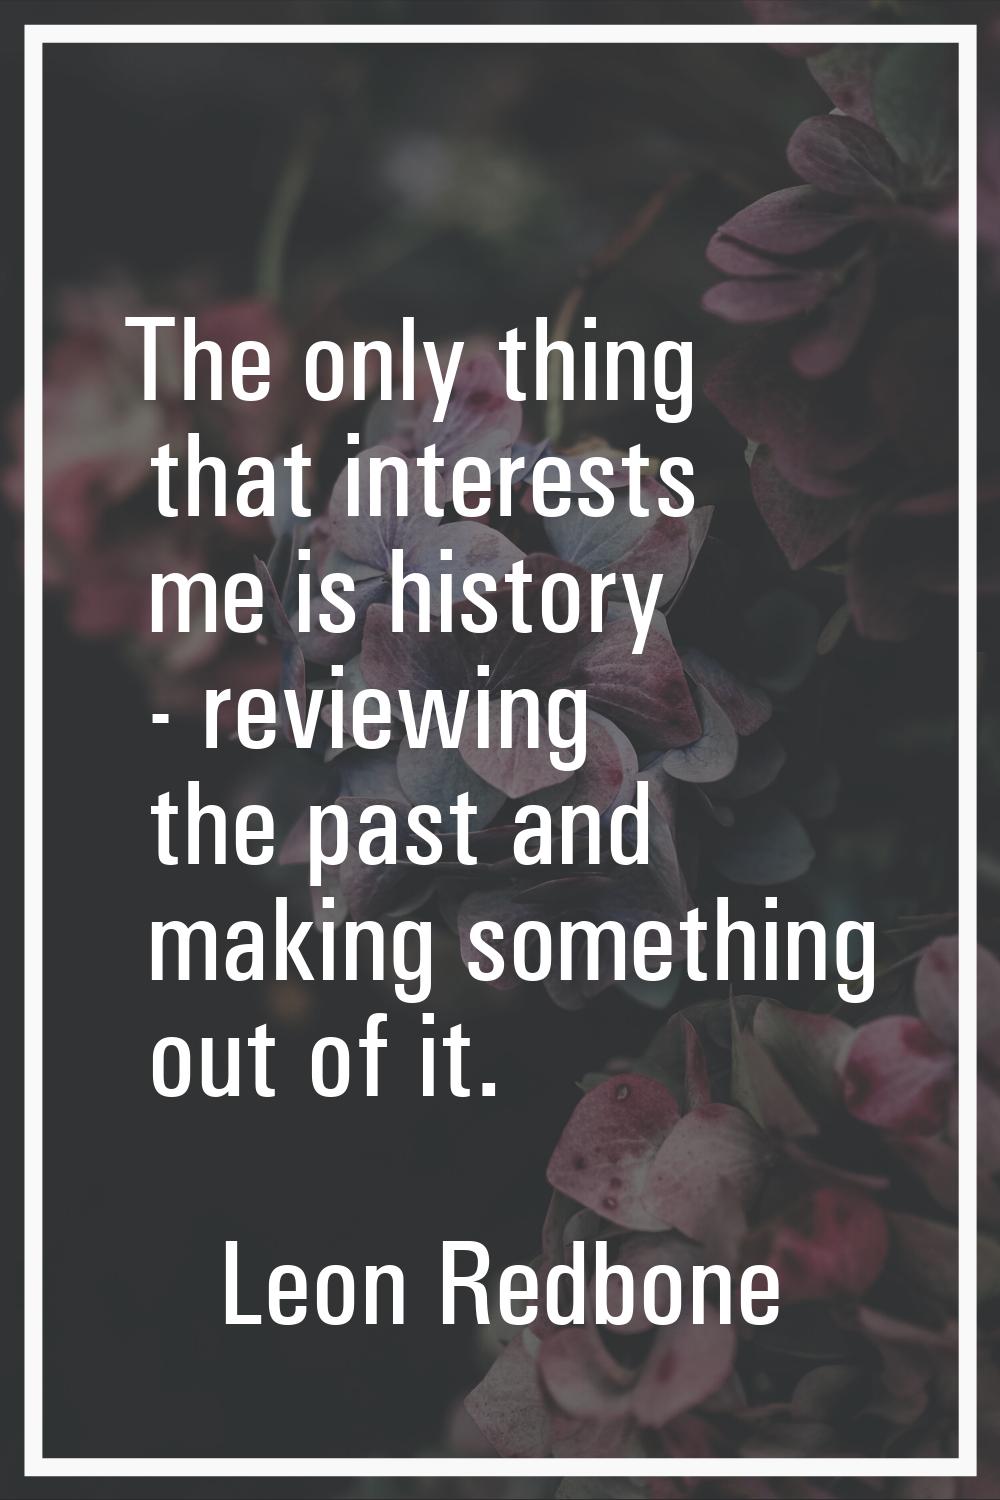 The only thing that interests me is history - reviewing the past and making something out of it.